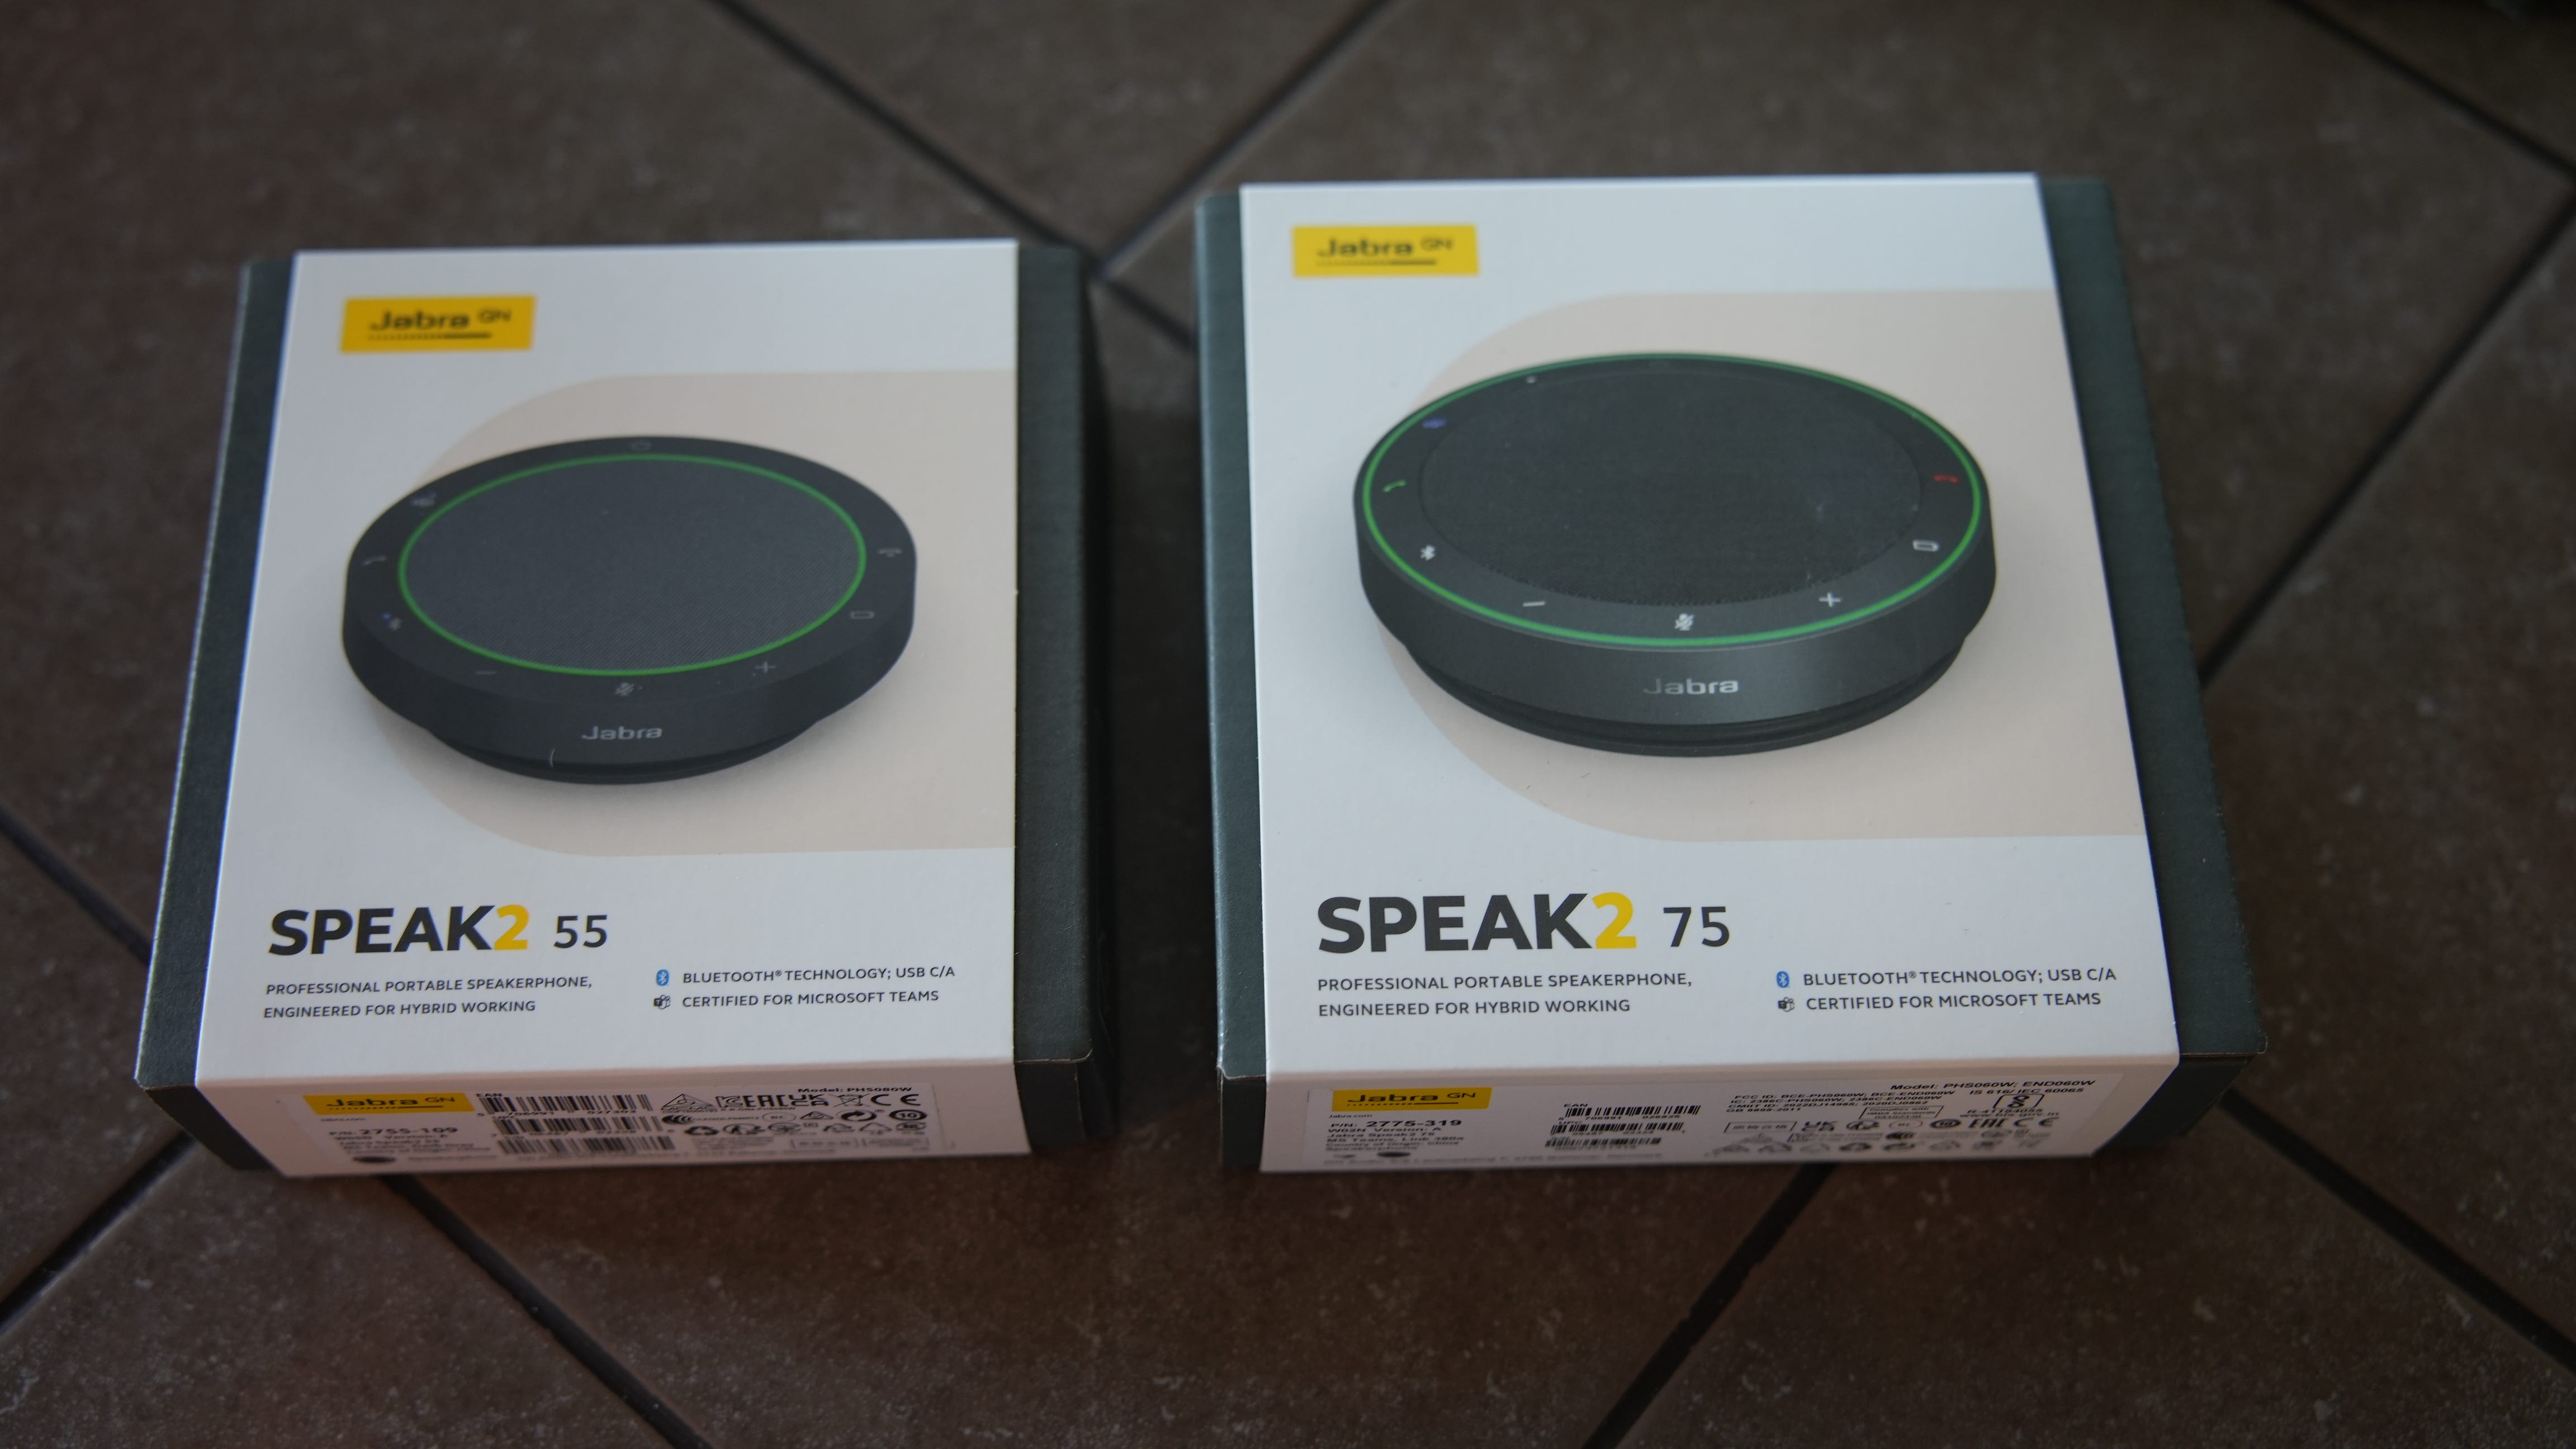 Jabra Speak2 75 hybrid a Free quality your review: work with speakerphone high